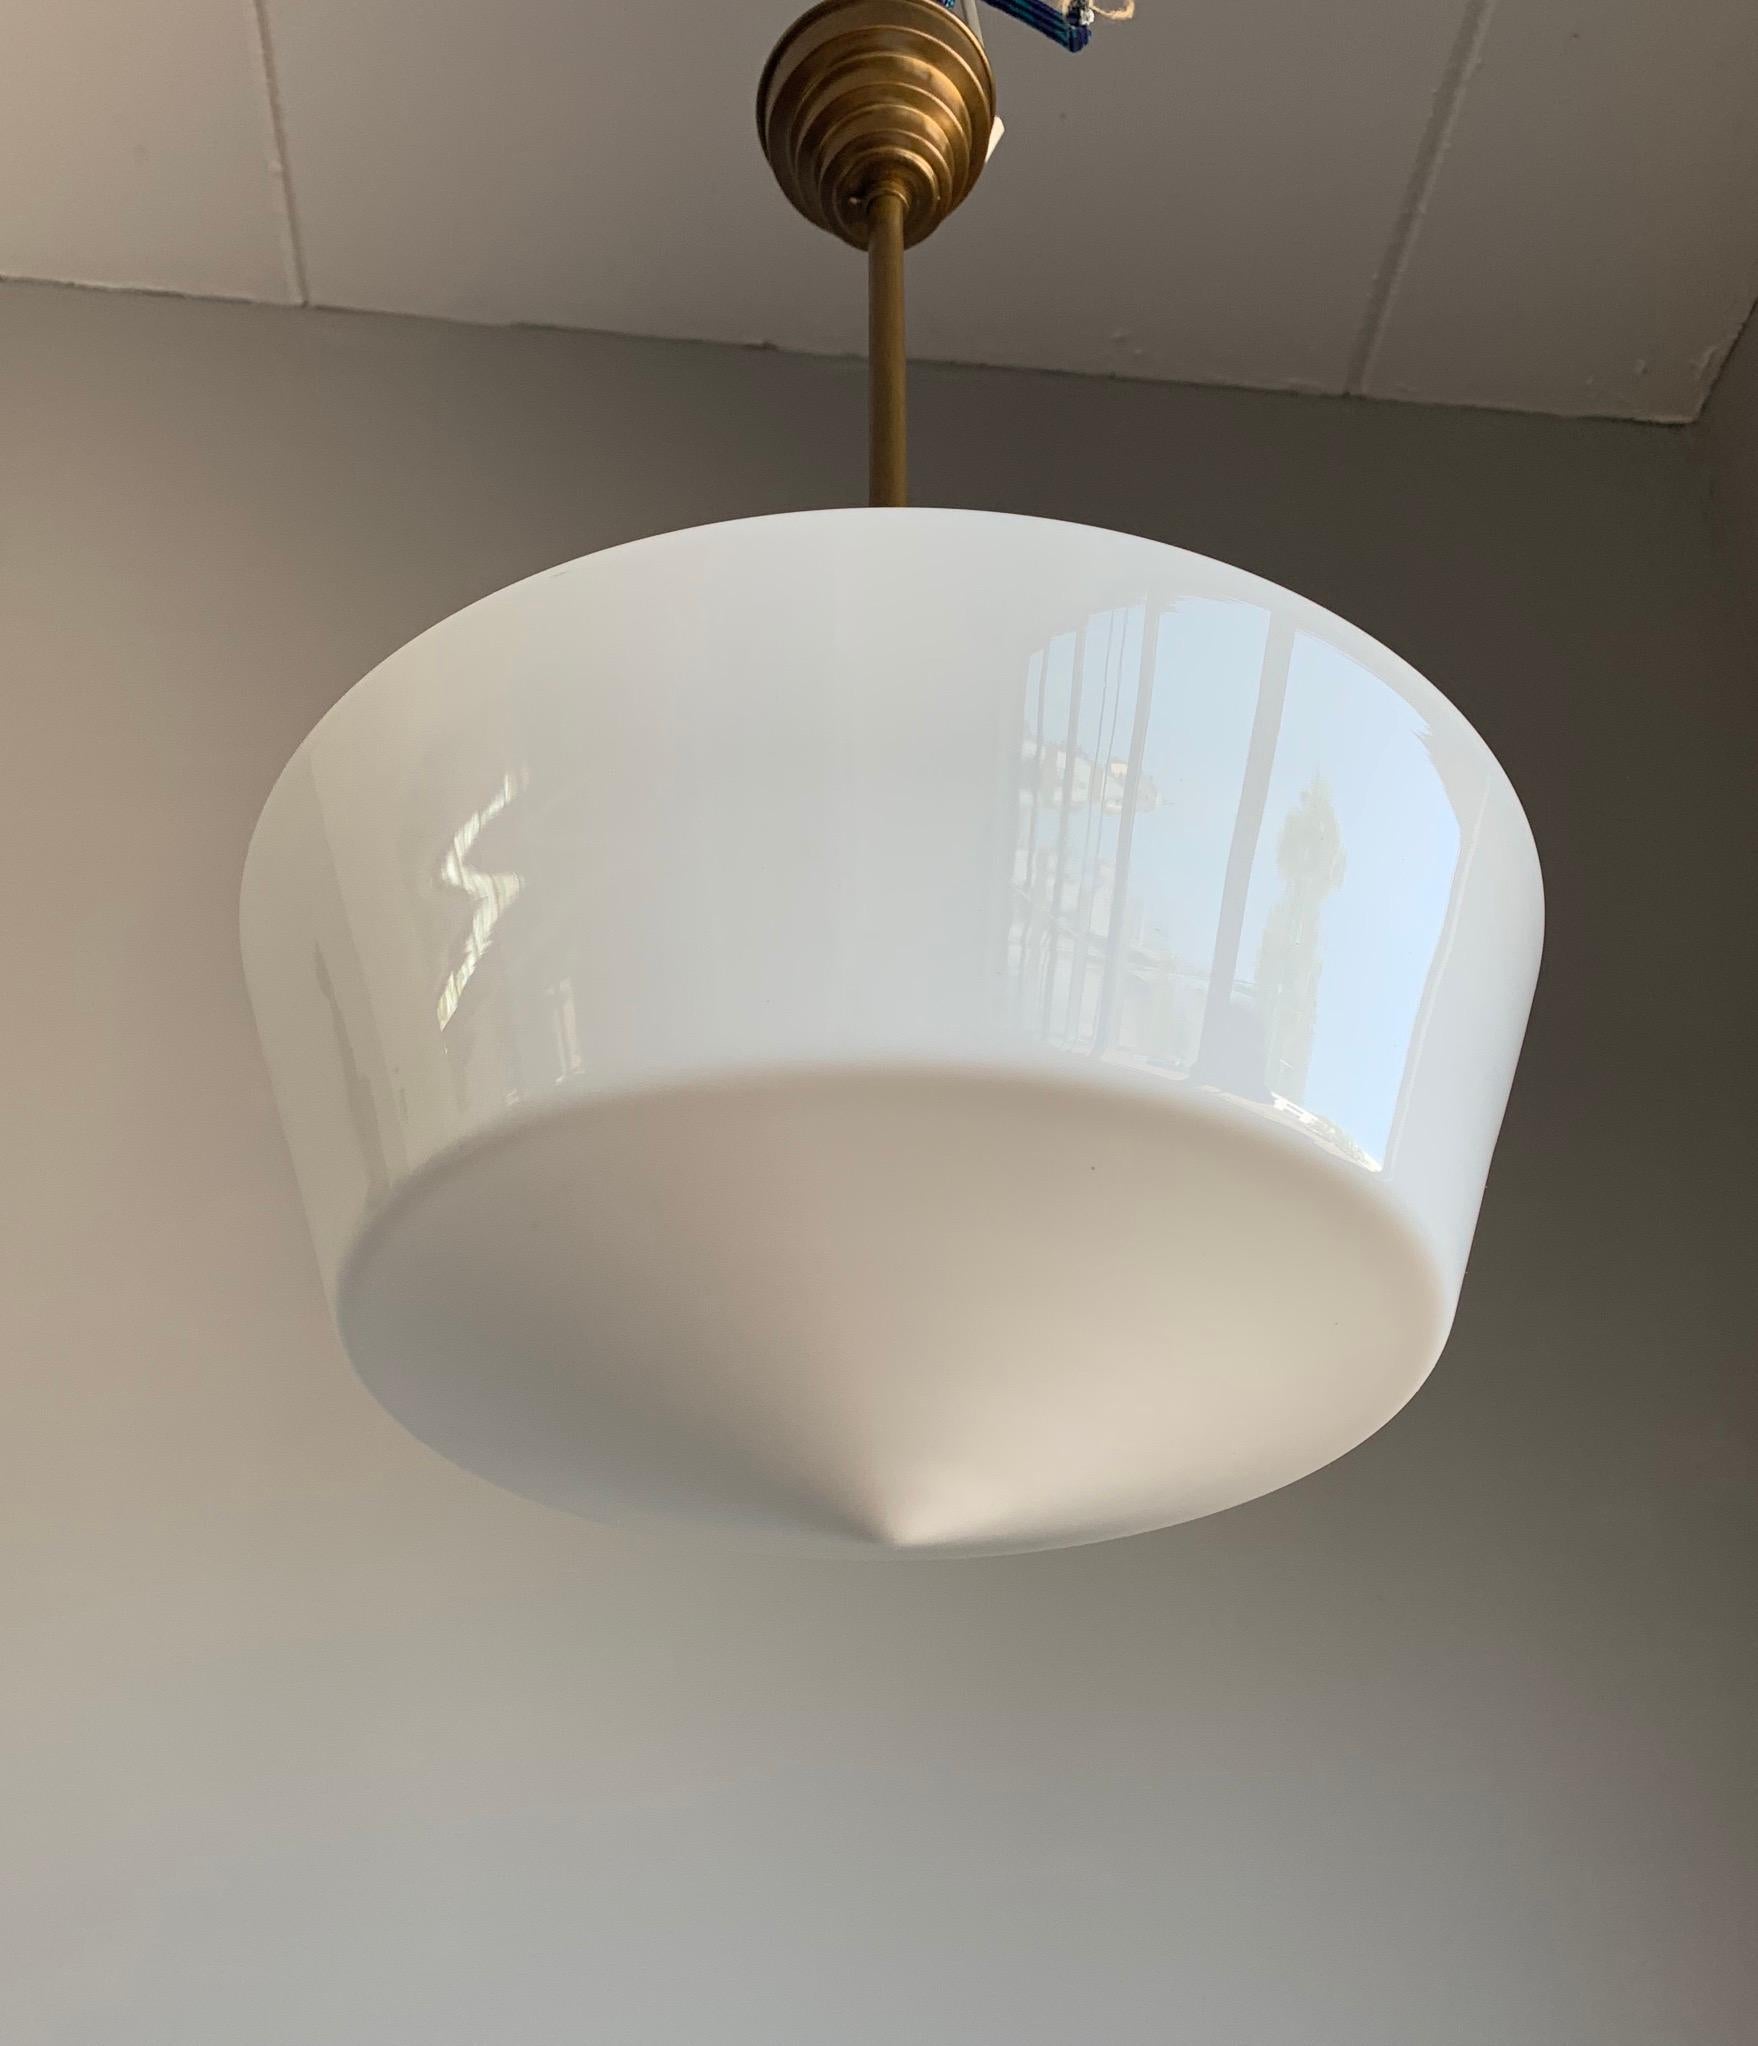 Hand-Crafted Art Deco Pendant Light Bauhaus Style Made of Brass and White Opaline Glass 1920s